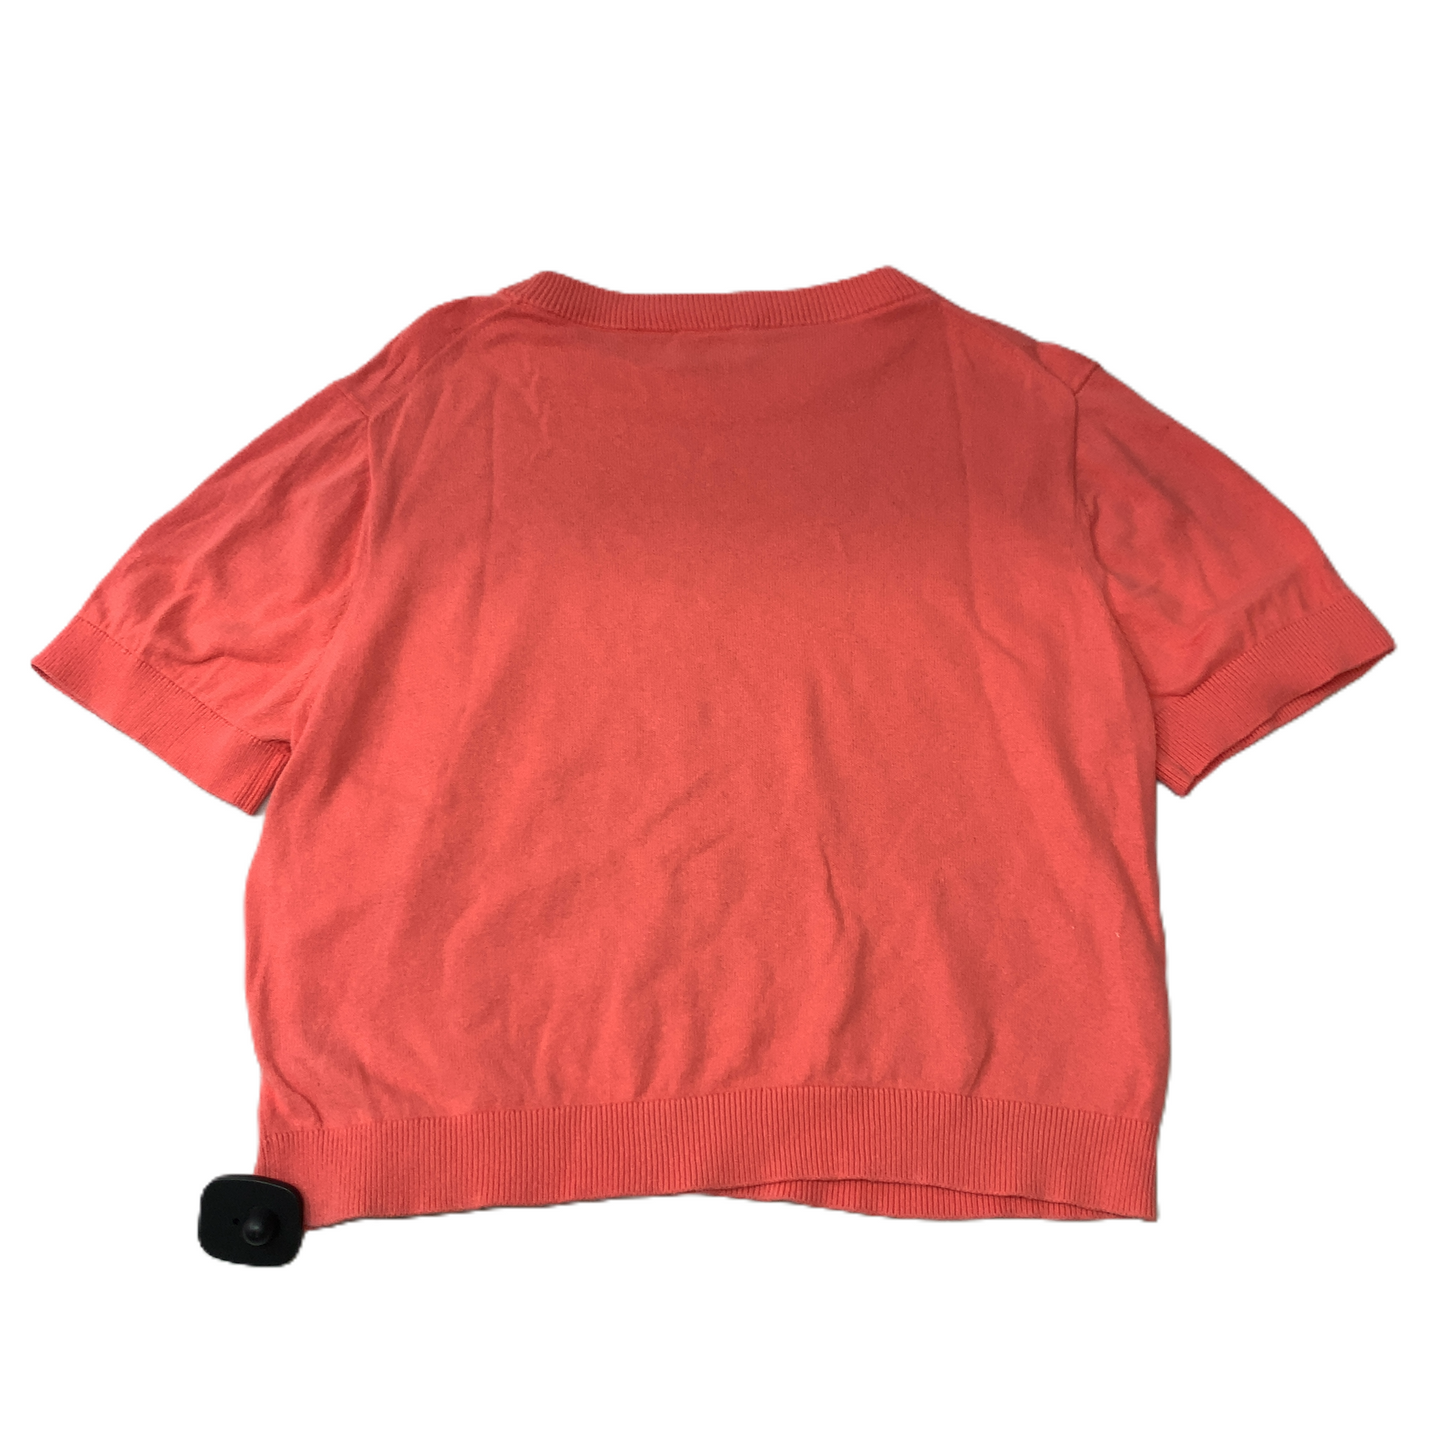 Coral  Top Short Sleeve Designer By Kate Spade  Size: Xl